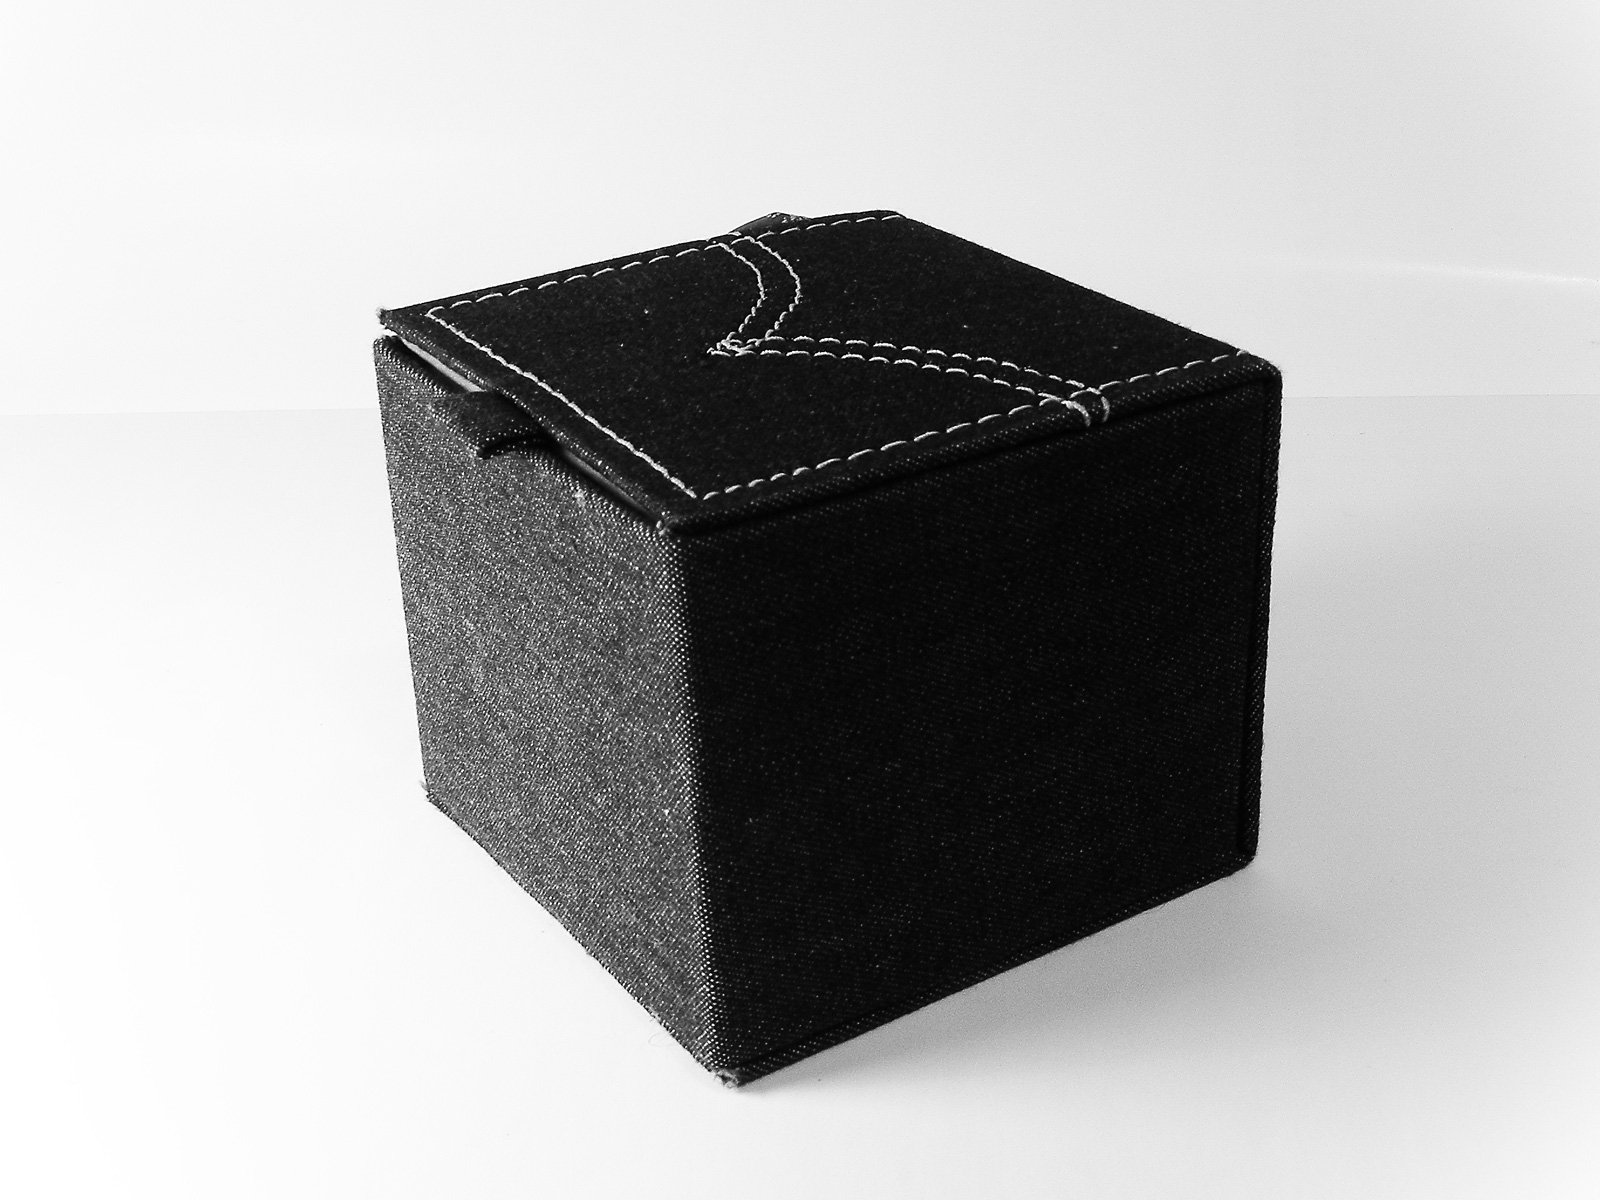 the box is made out of dark colored material